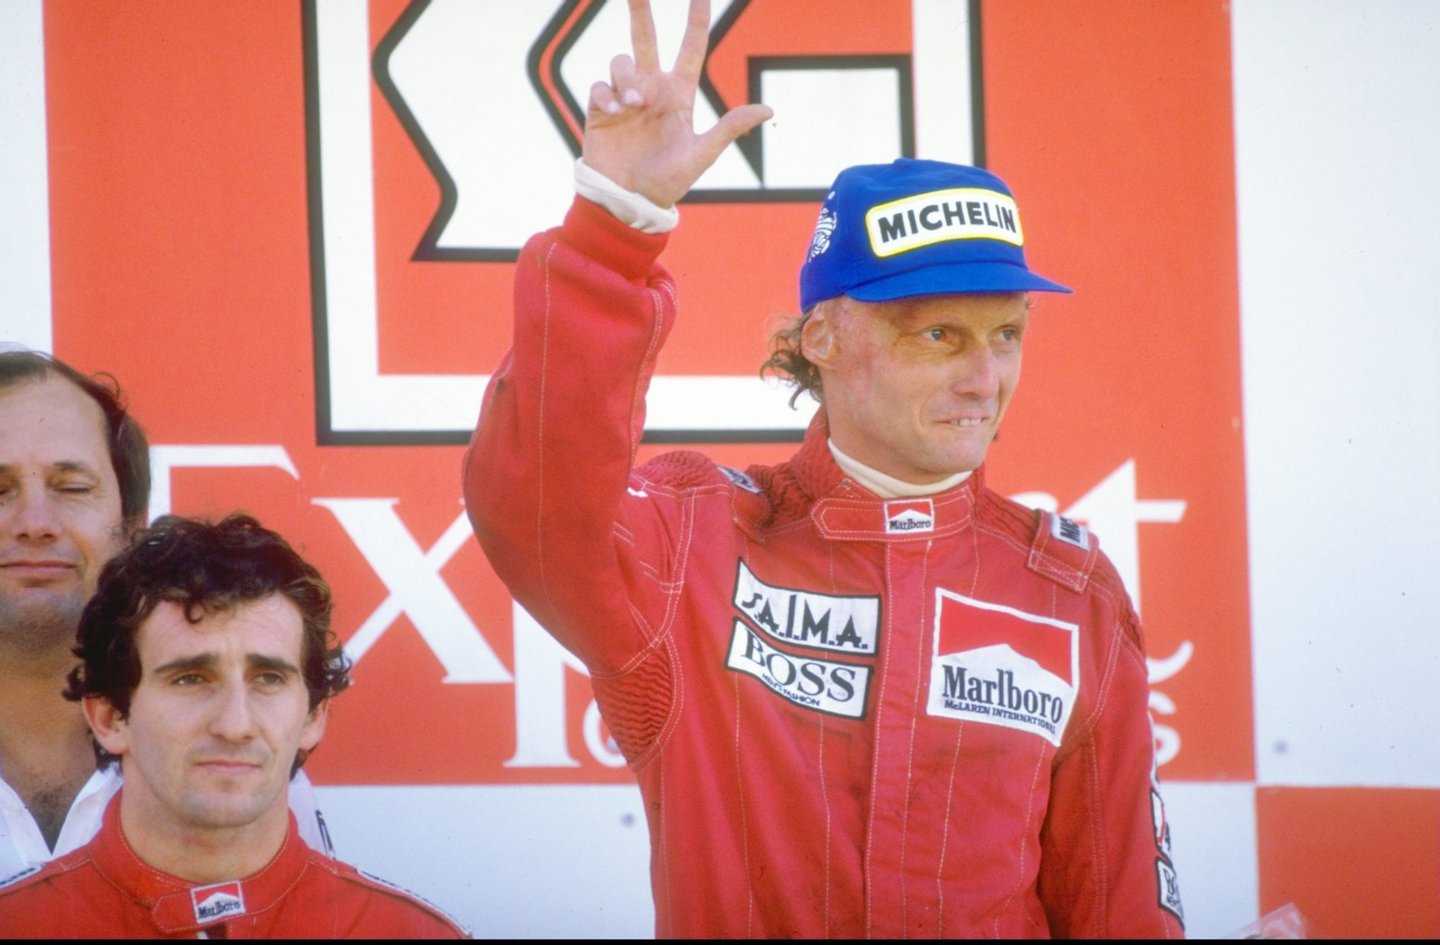 1984: Marlboro McLaren drivers Alain Prost of France and Niki Lauda of Austria stand on the winners'' podium after the Portuguese Grand Prix at the Estoril circuit in Portugal. Prost finished in first place and Lauda in second. Mandatory Credit: Mike Powell/Allsport